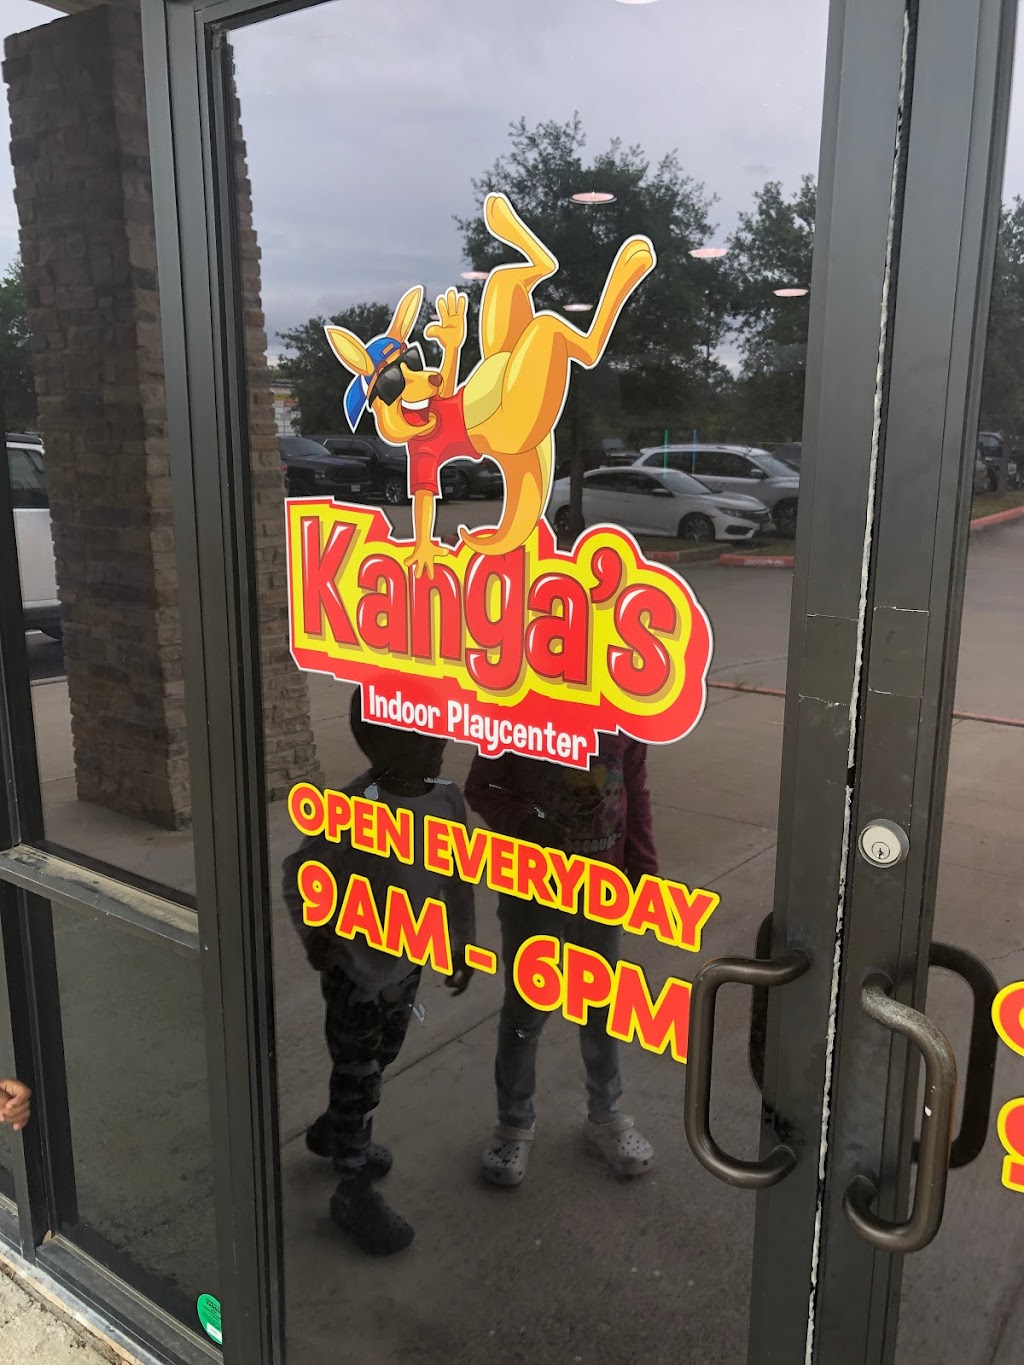 Kangas Indoor Playcenter and Cafe, Katy | 610 Katy Fort Bend Rd, Katy, TX 77494 | Phone: (281) 645-0980